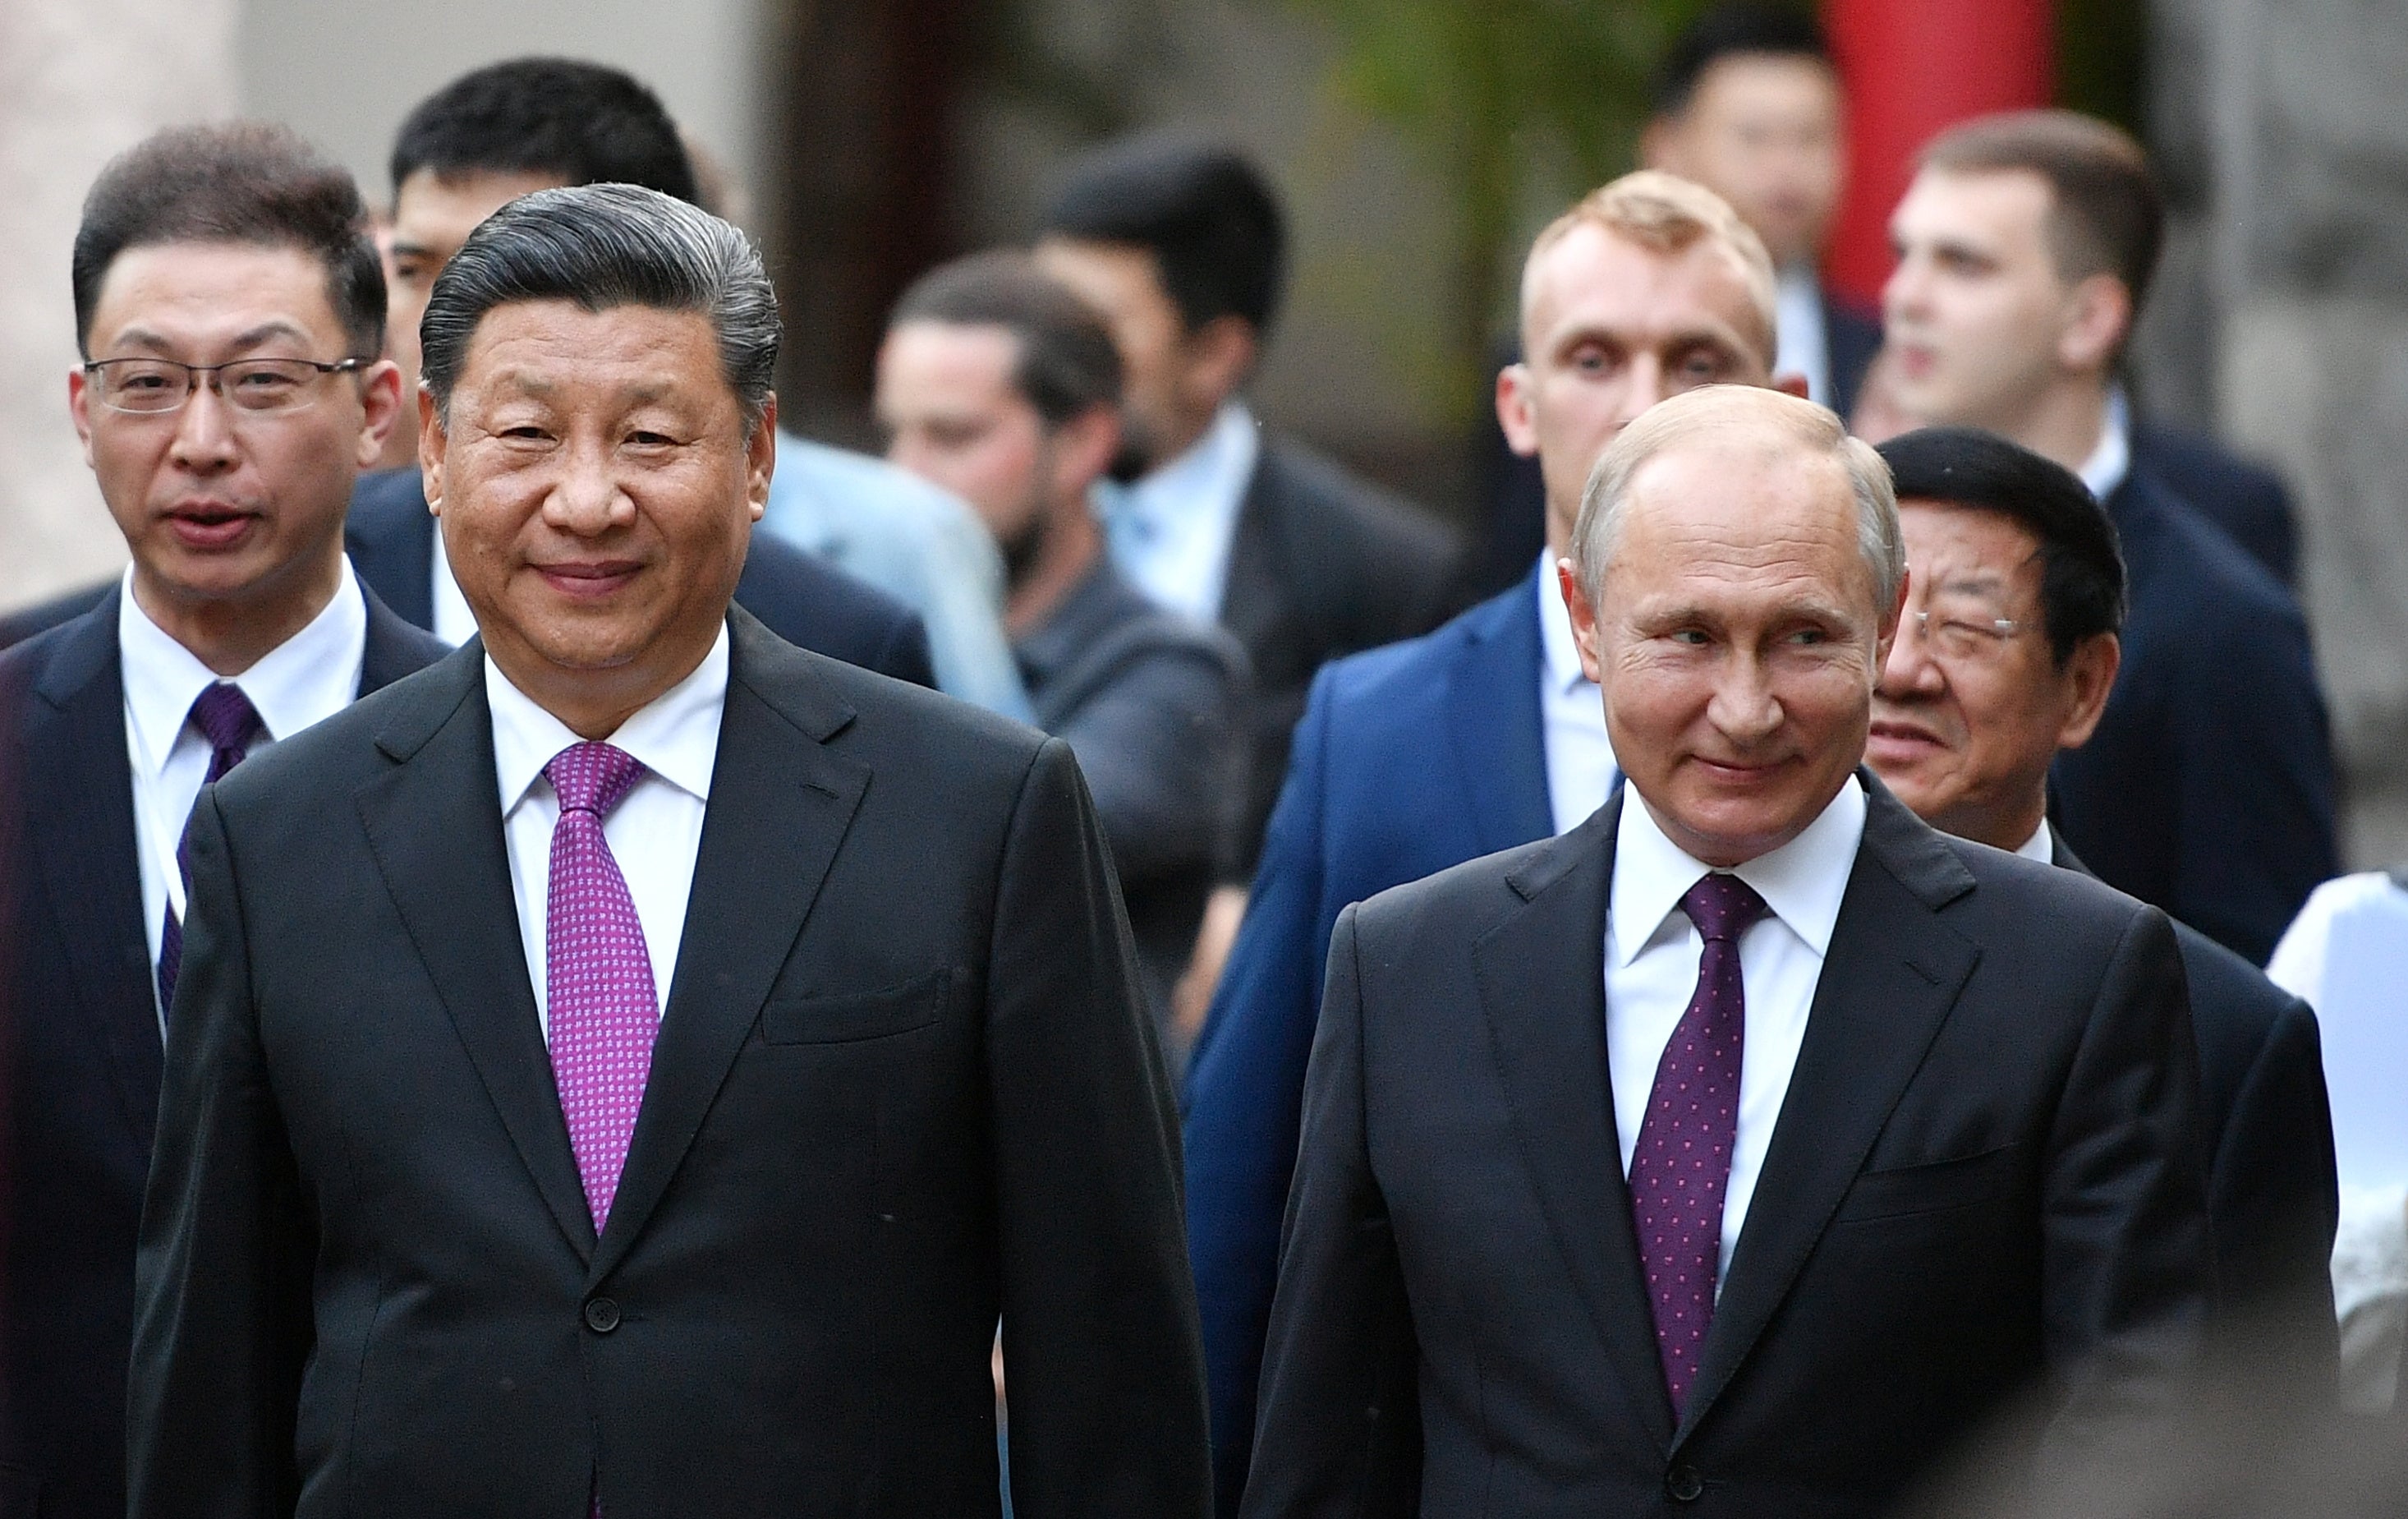 File: China’s Xi Jinping and Russia’ Vladimir Putin on a visit to Moscow Zoo in June 2019 